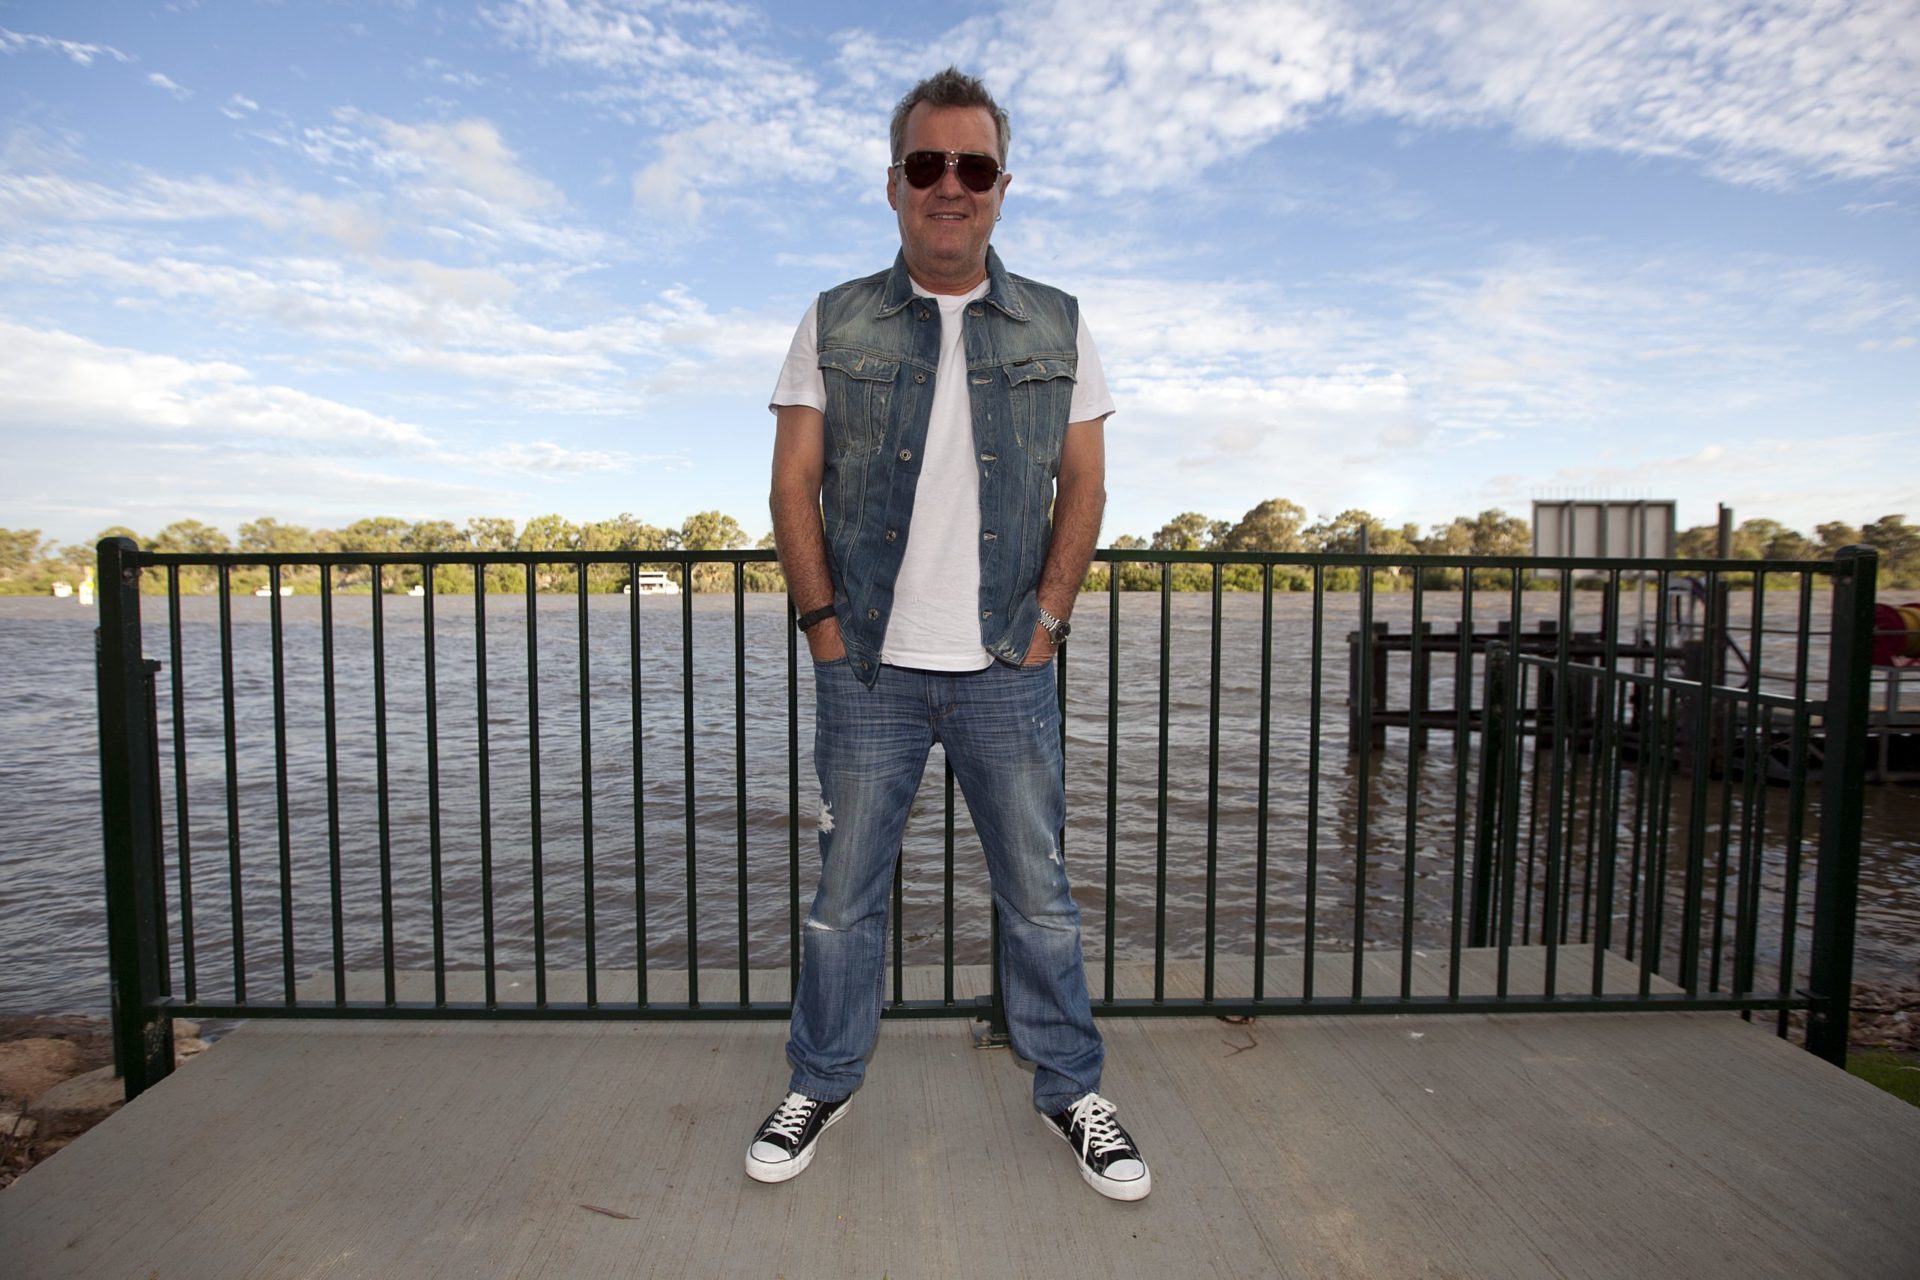 Jimmy Barnes @ Sounds By The River, January ’11